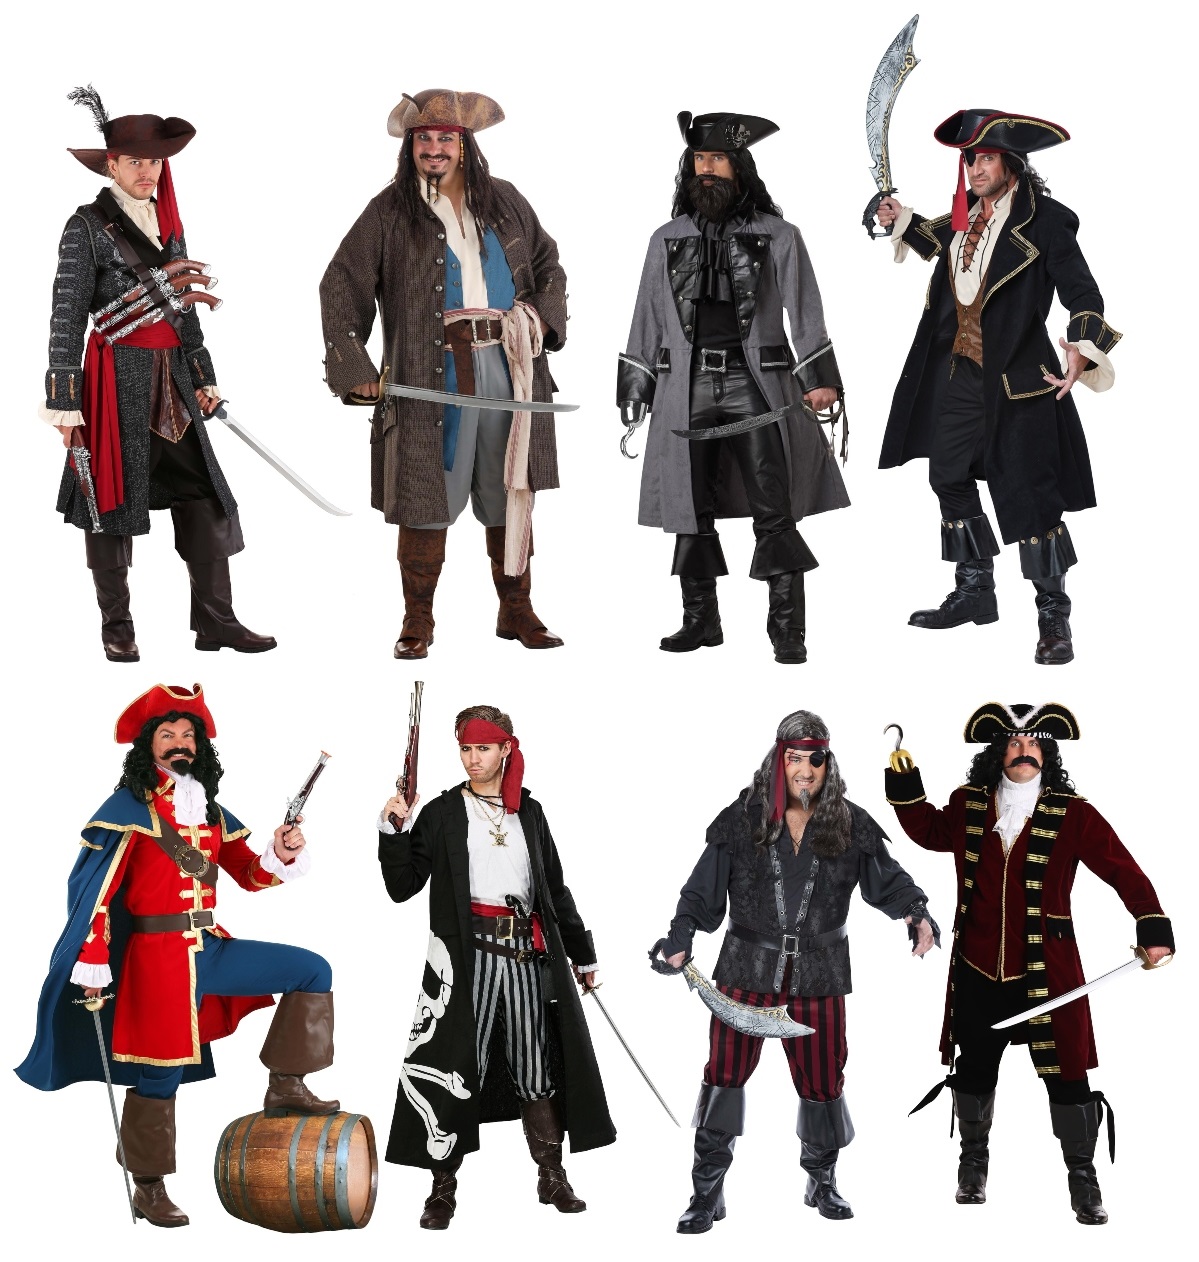 Pirate Costumes for All Ages [Costume Guide] -  Blog